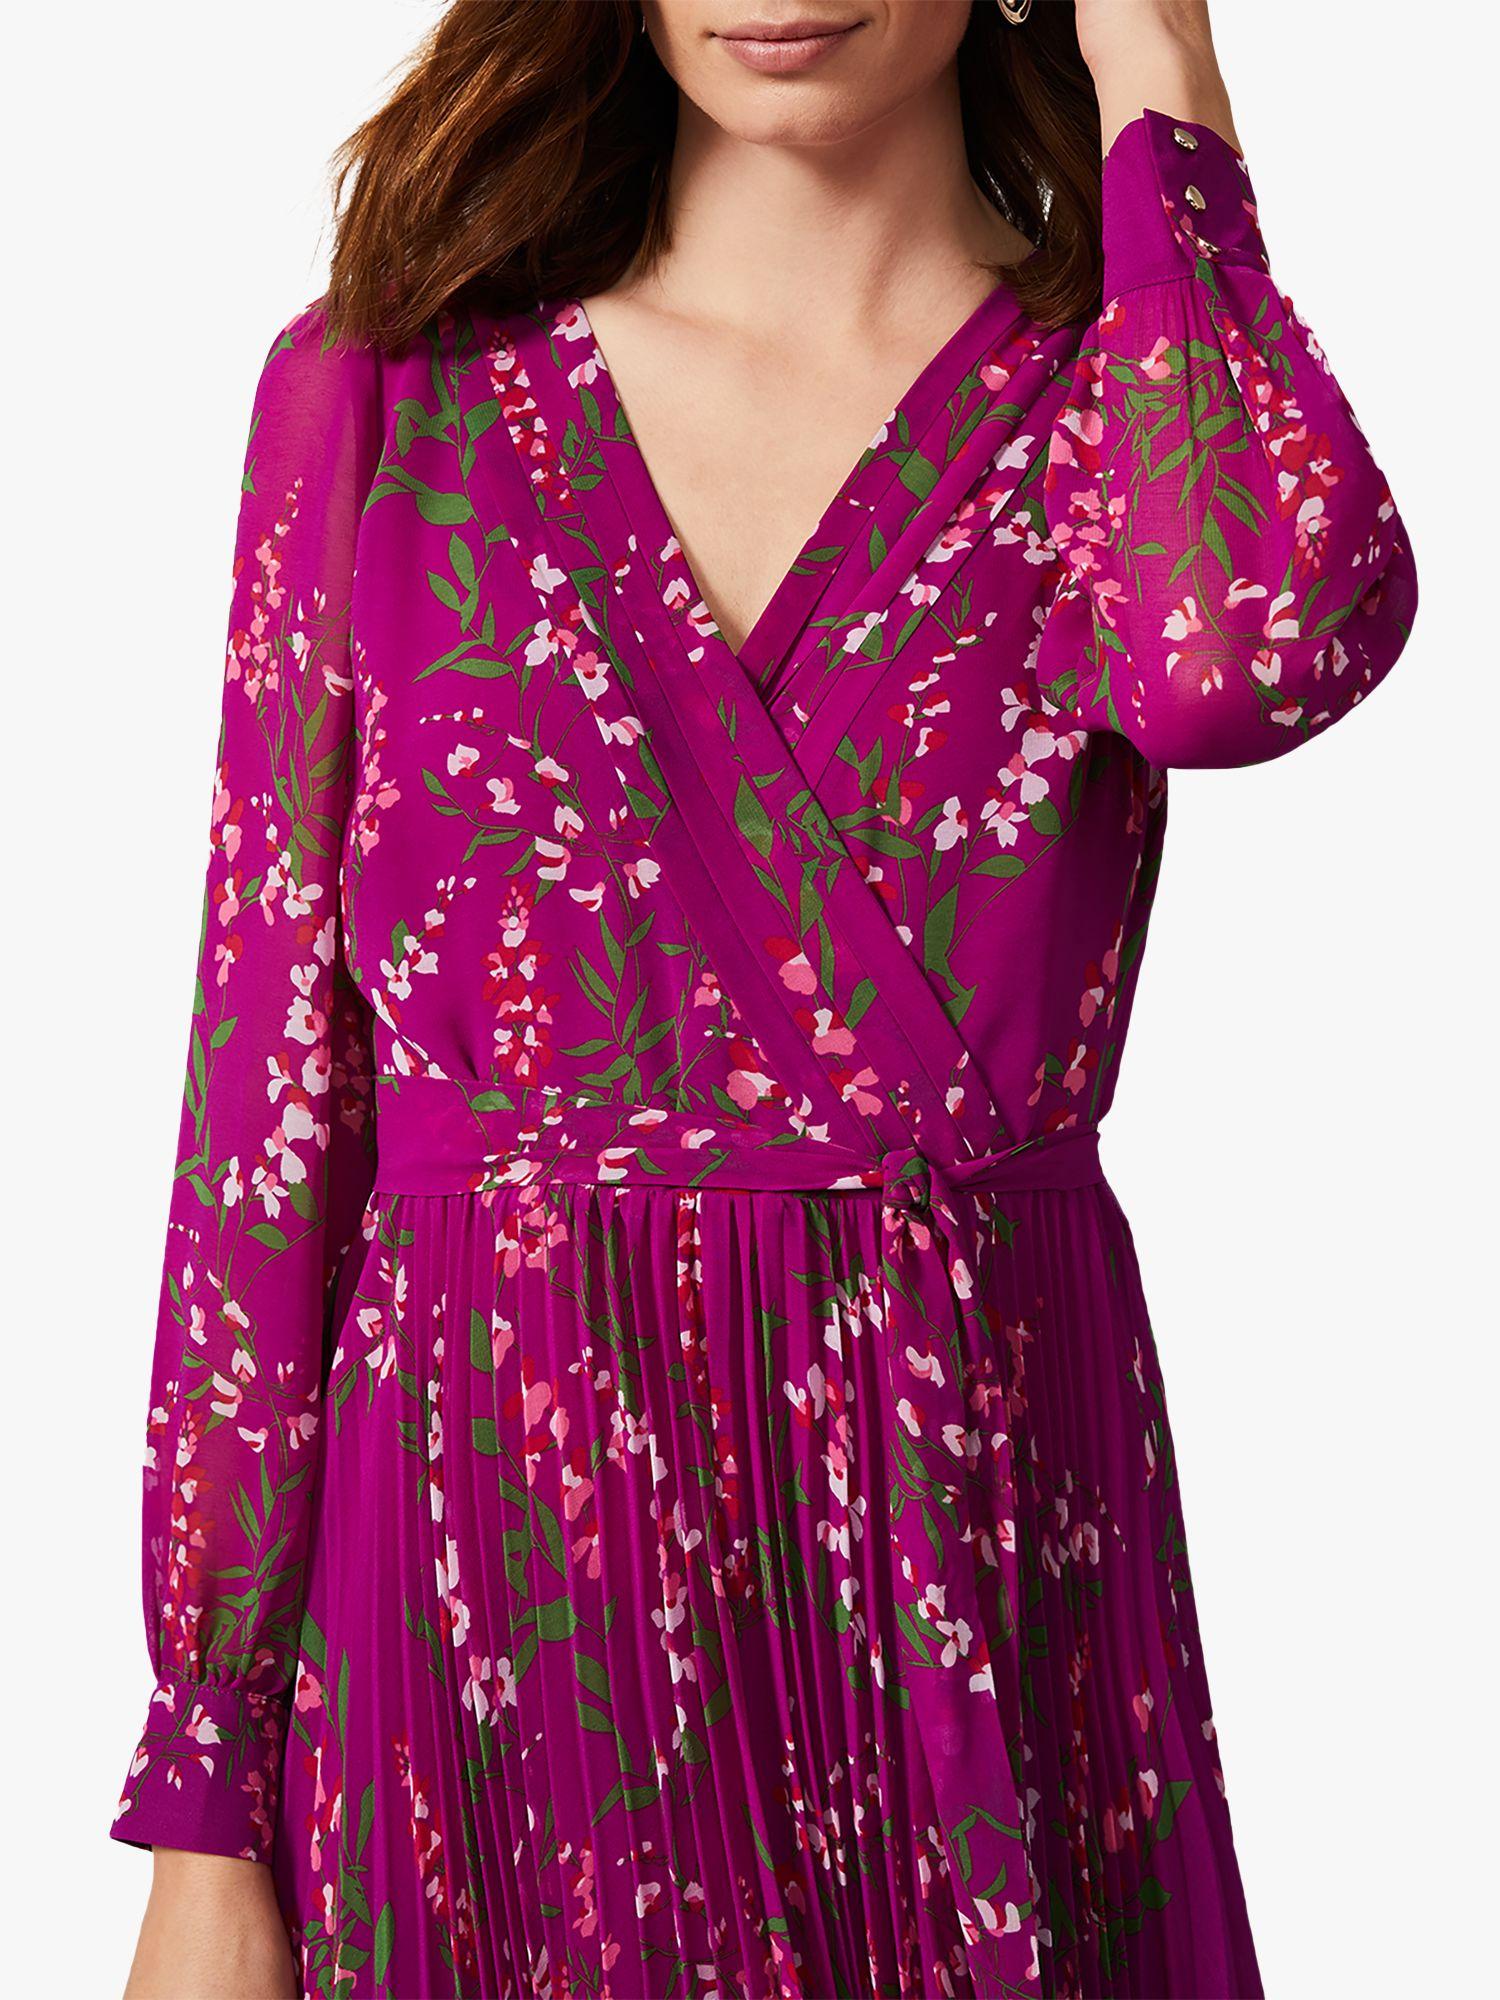 Phase Eight Synthetic Carmen Pleated Floral Dress in Bright Plum (Purple) -  Save 20% - Lyst